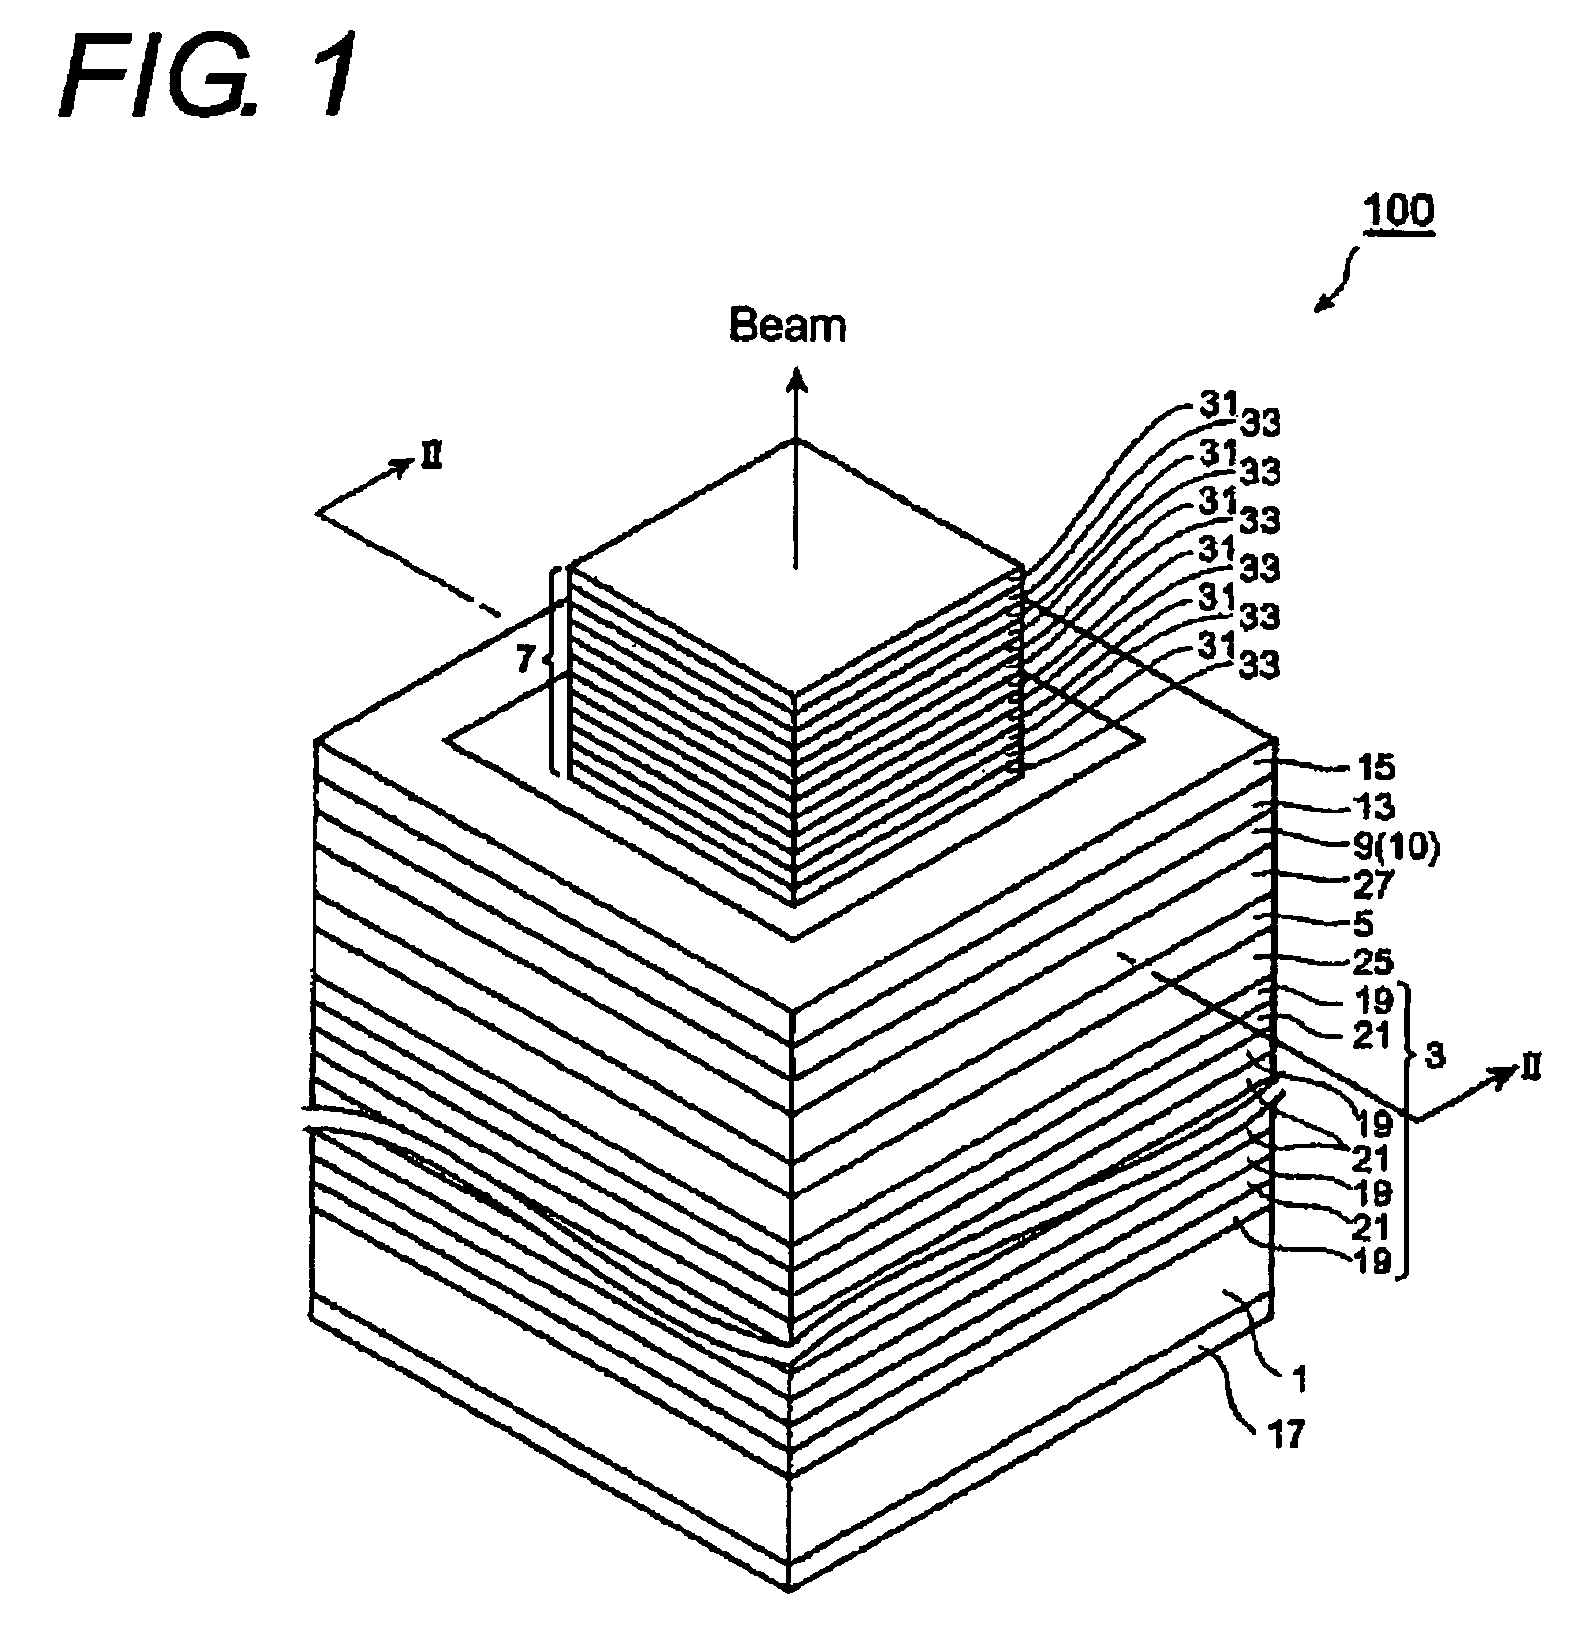 Vertical cavity surface emitting laser diode having a high reflective distributed Bragg reflector